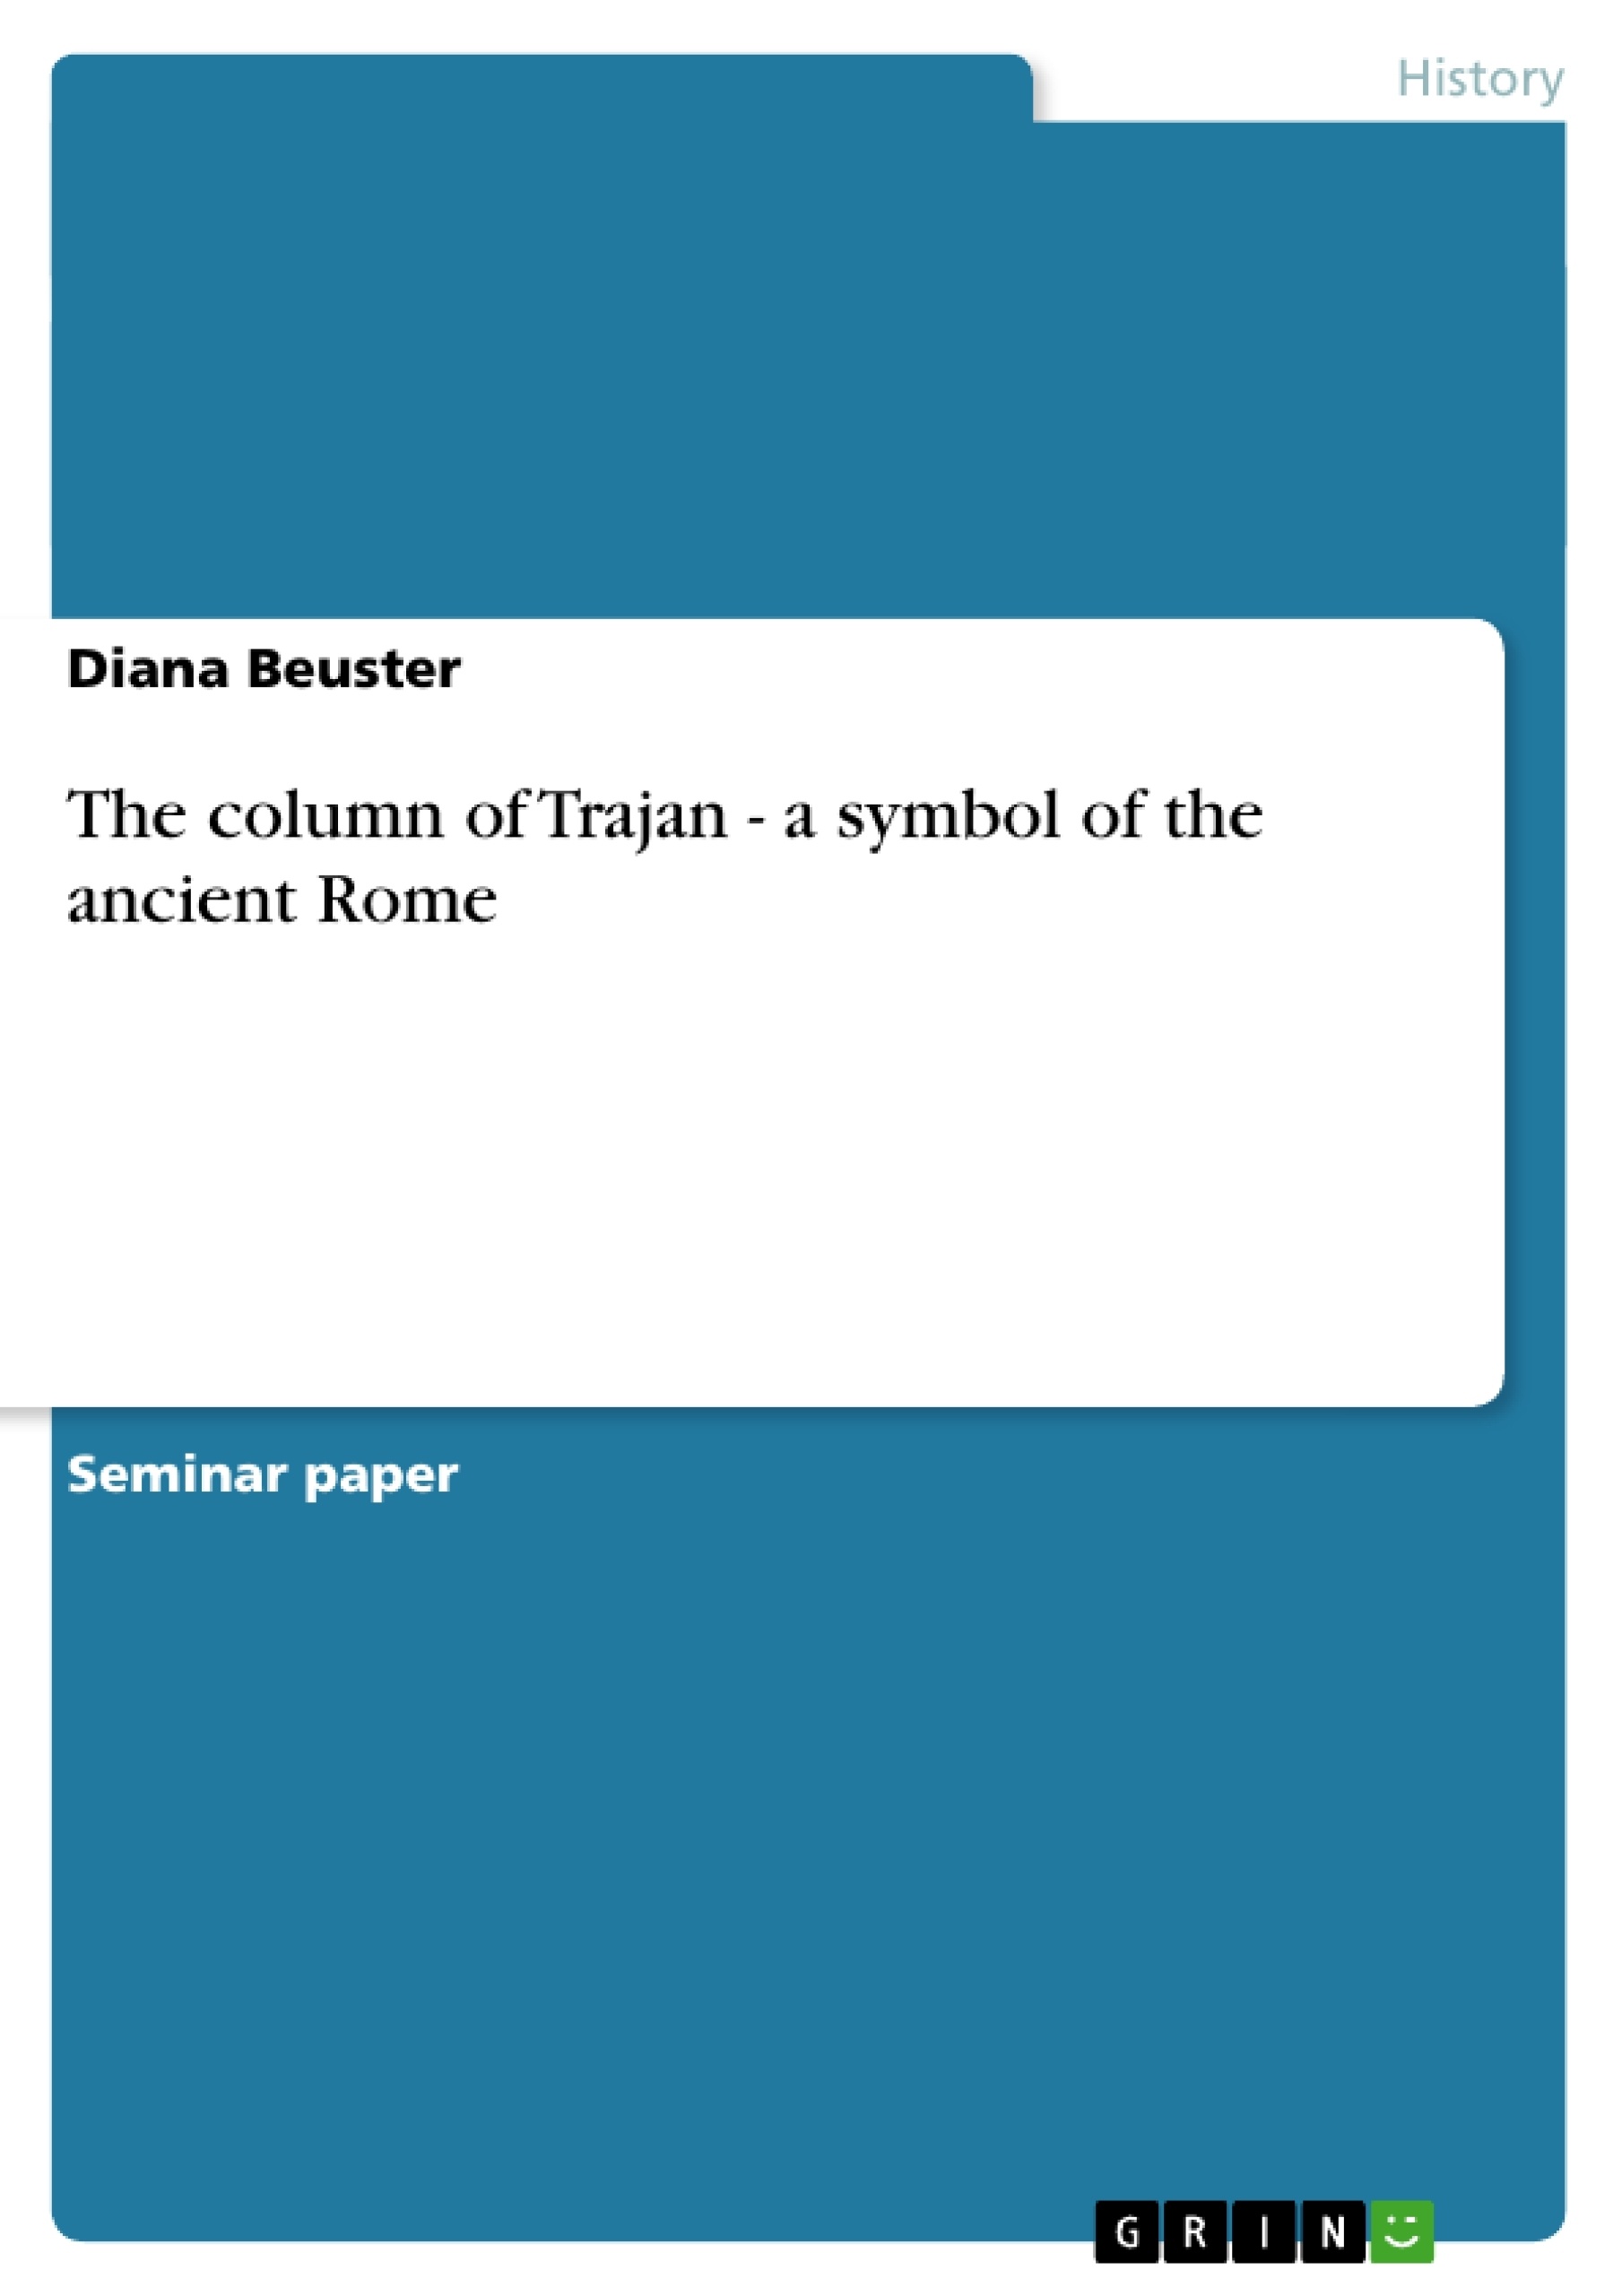 Title: The column of Trajan - a symbol of the ancient Rome